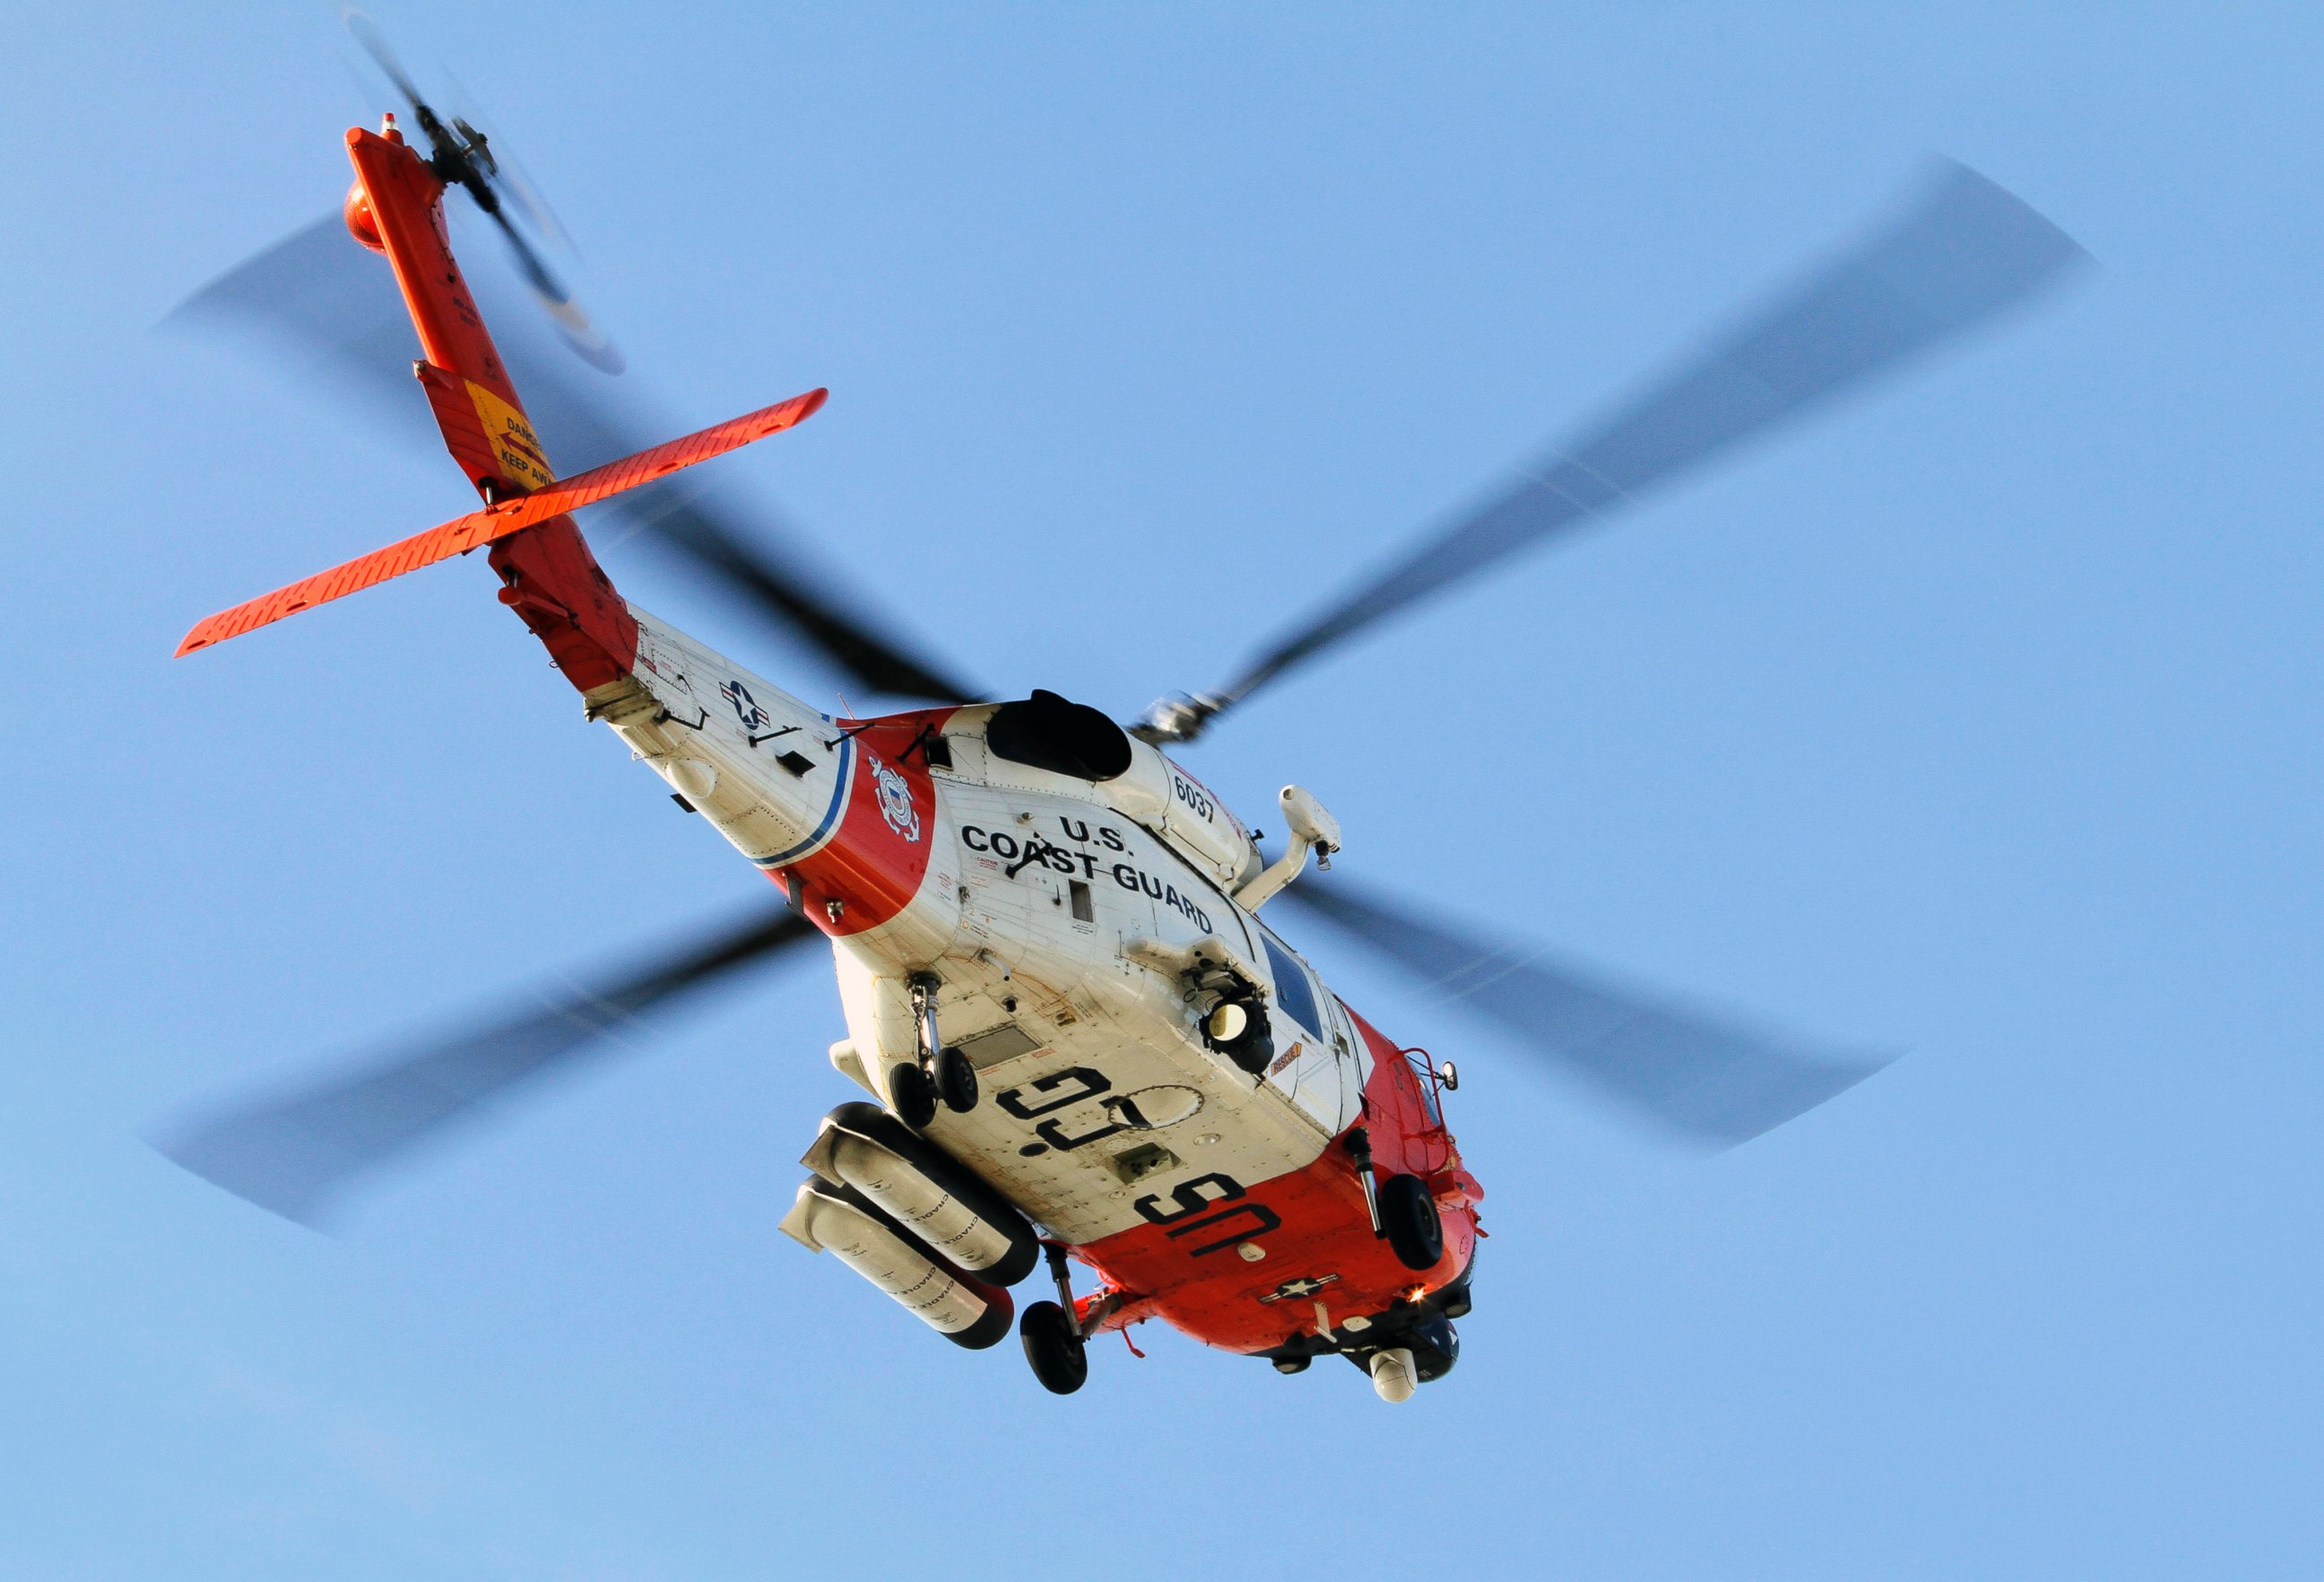 PHOTO: In this Oct. 30, 2009 file photo, a U.S. Coast Guard MH-60 Jayhawk helicopter lifts off at the San Diego Coast Guard Station during a search effort.